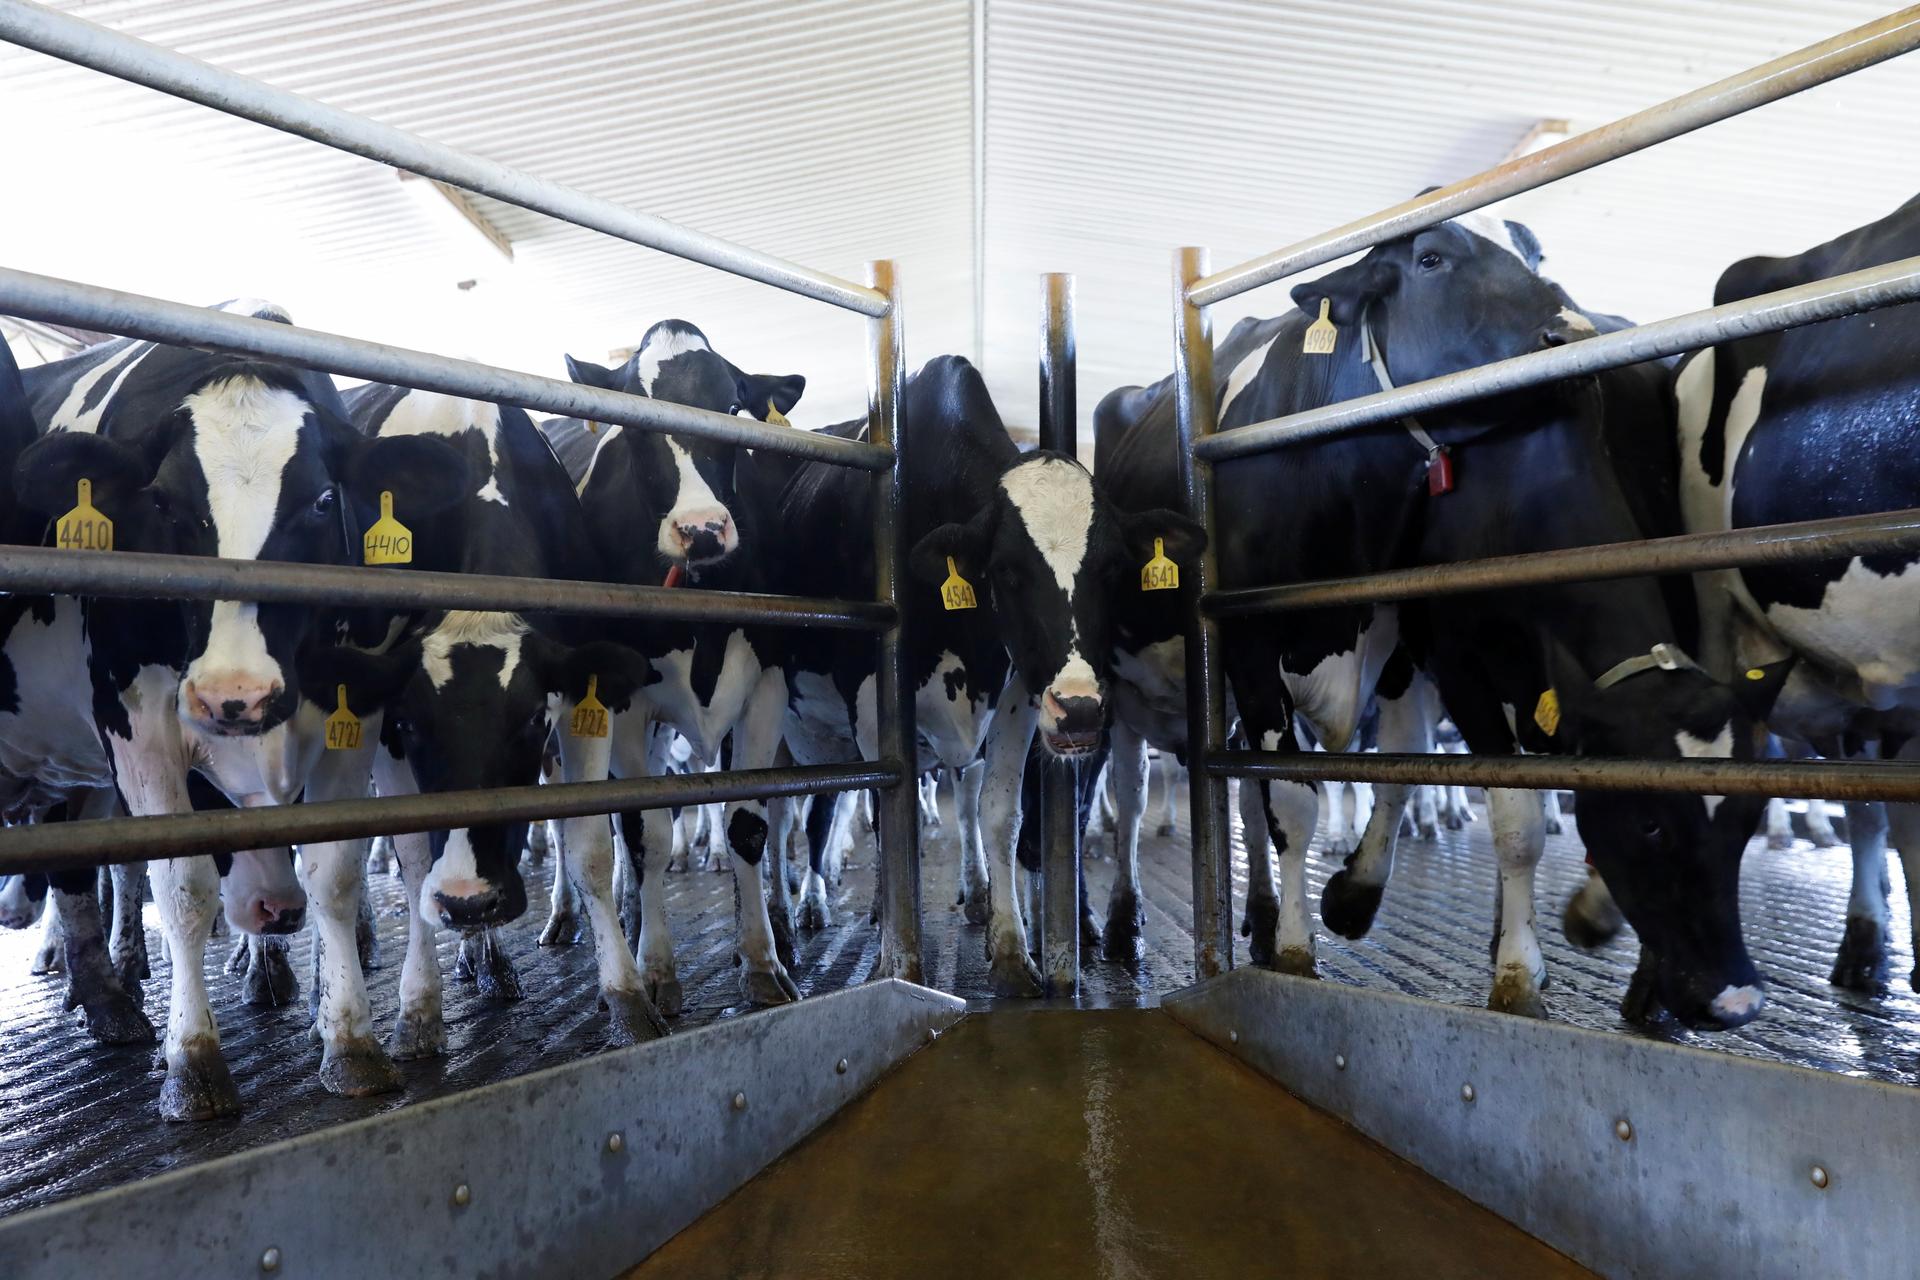 A group of dairy cows stand in a caged area inside a farm